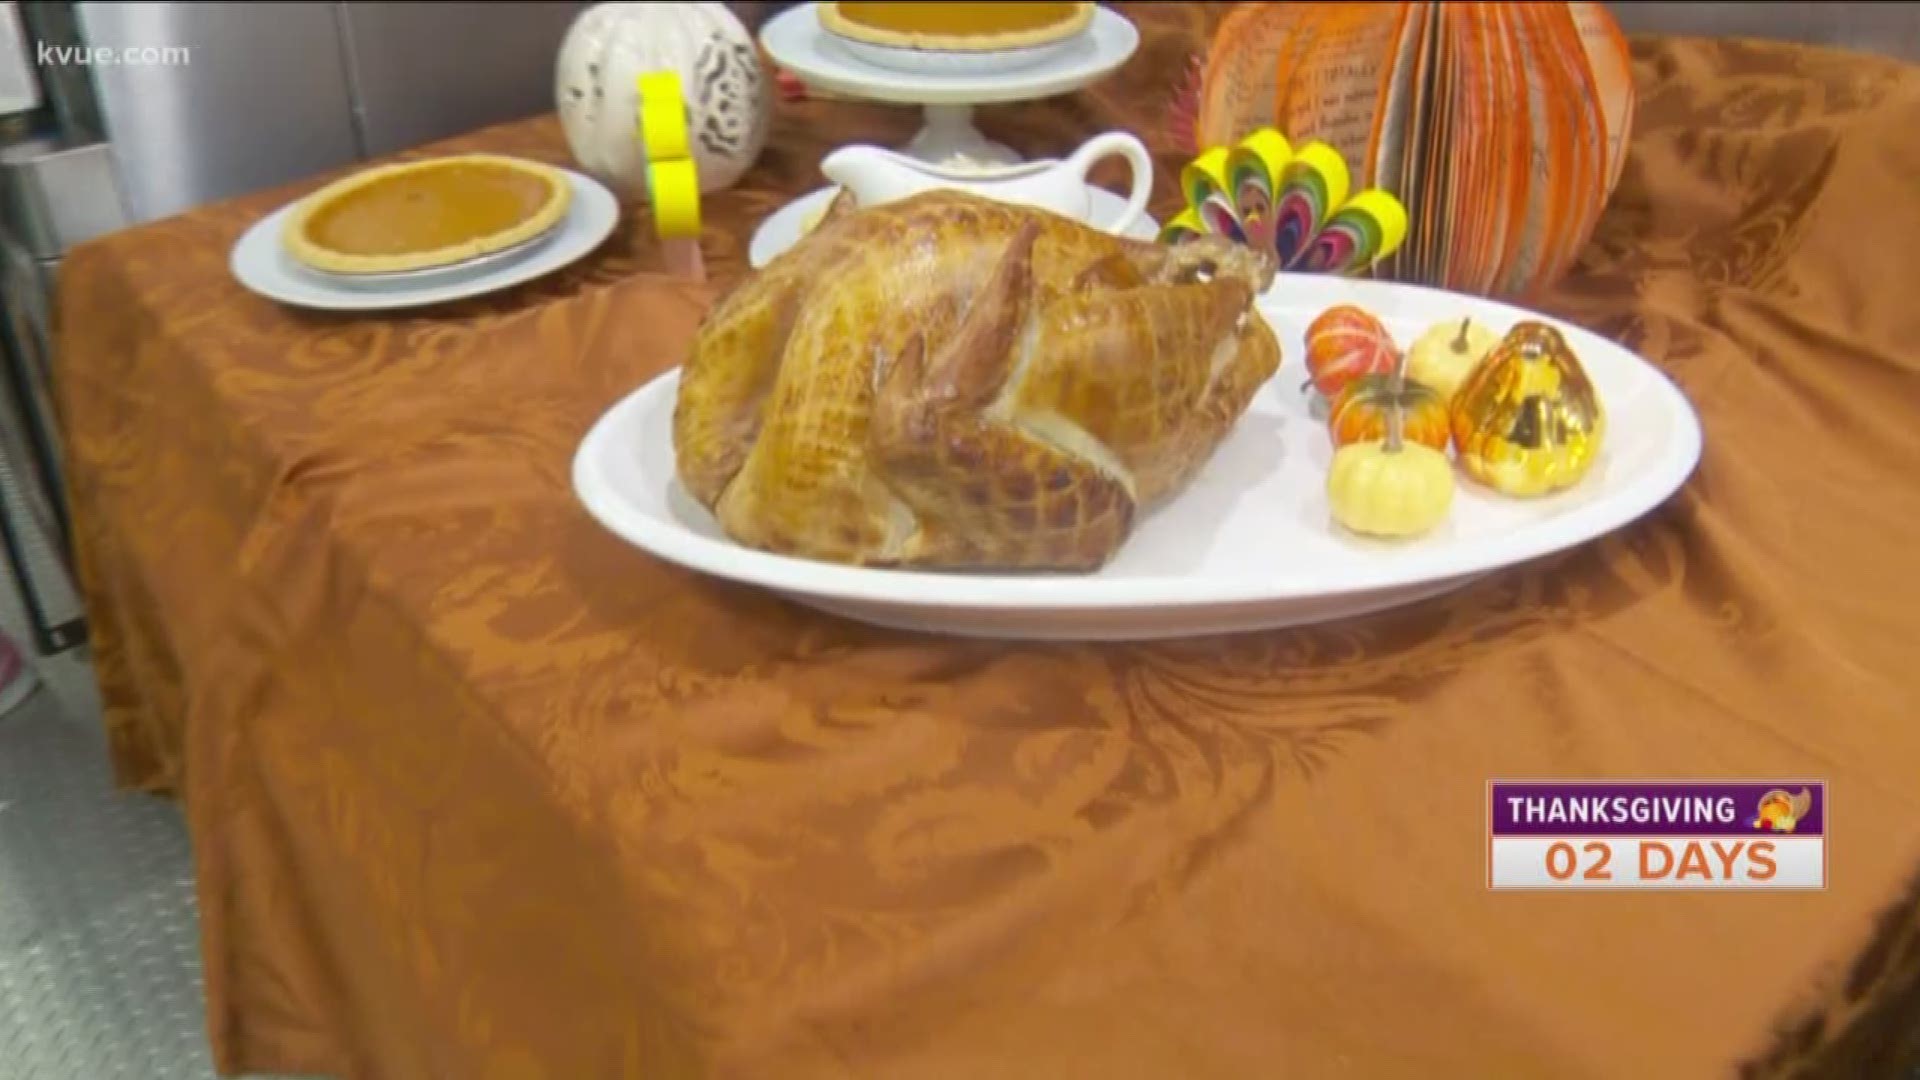 Thanksgiving is just two days away, but the biggest holiday meal in Austin happens Tuesday night: H-E-B's annual "Feast of Sharing" dinner.